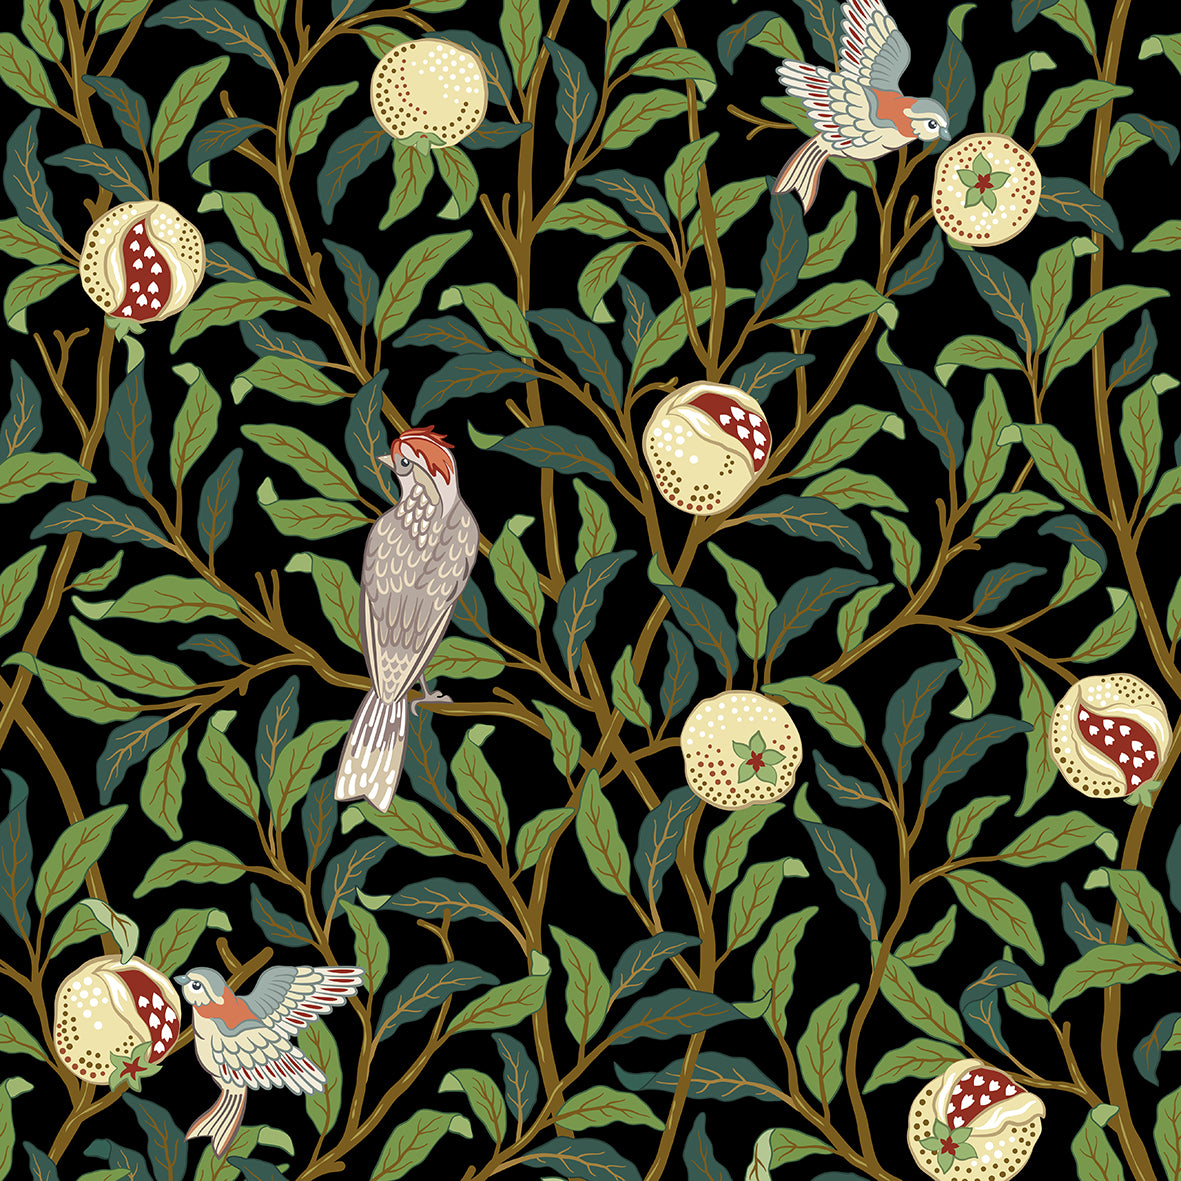 William Morris & Co Luxury Polycotton Towel - Bird and Pomegranate Collection (Onyx)